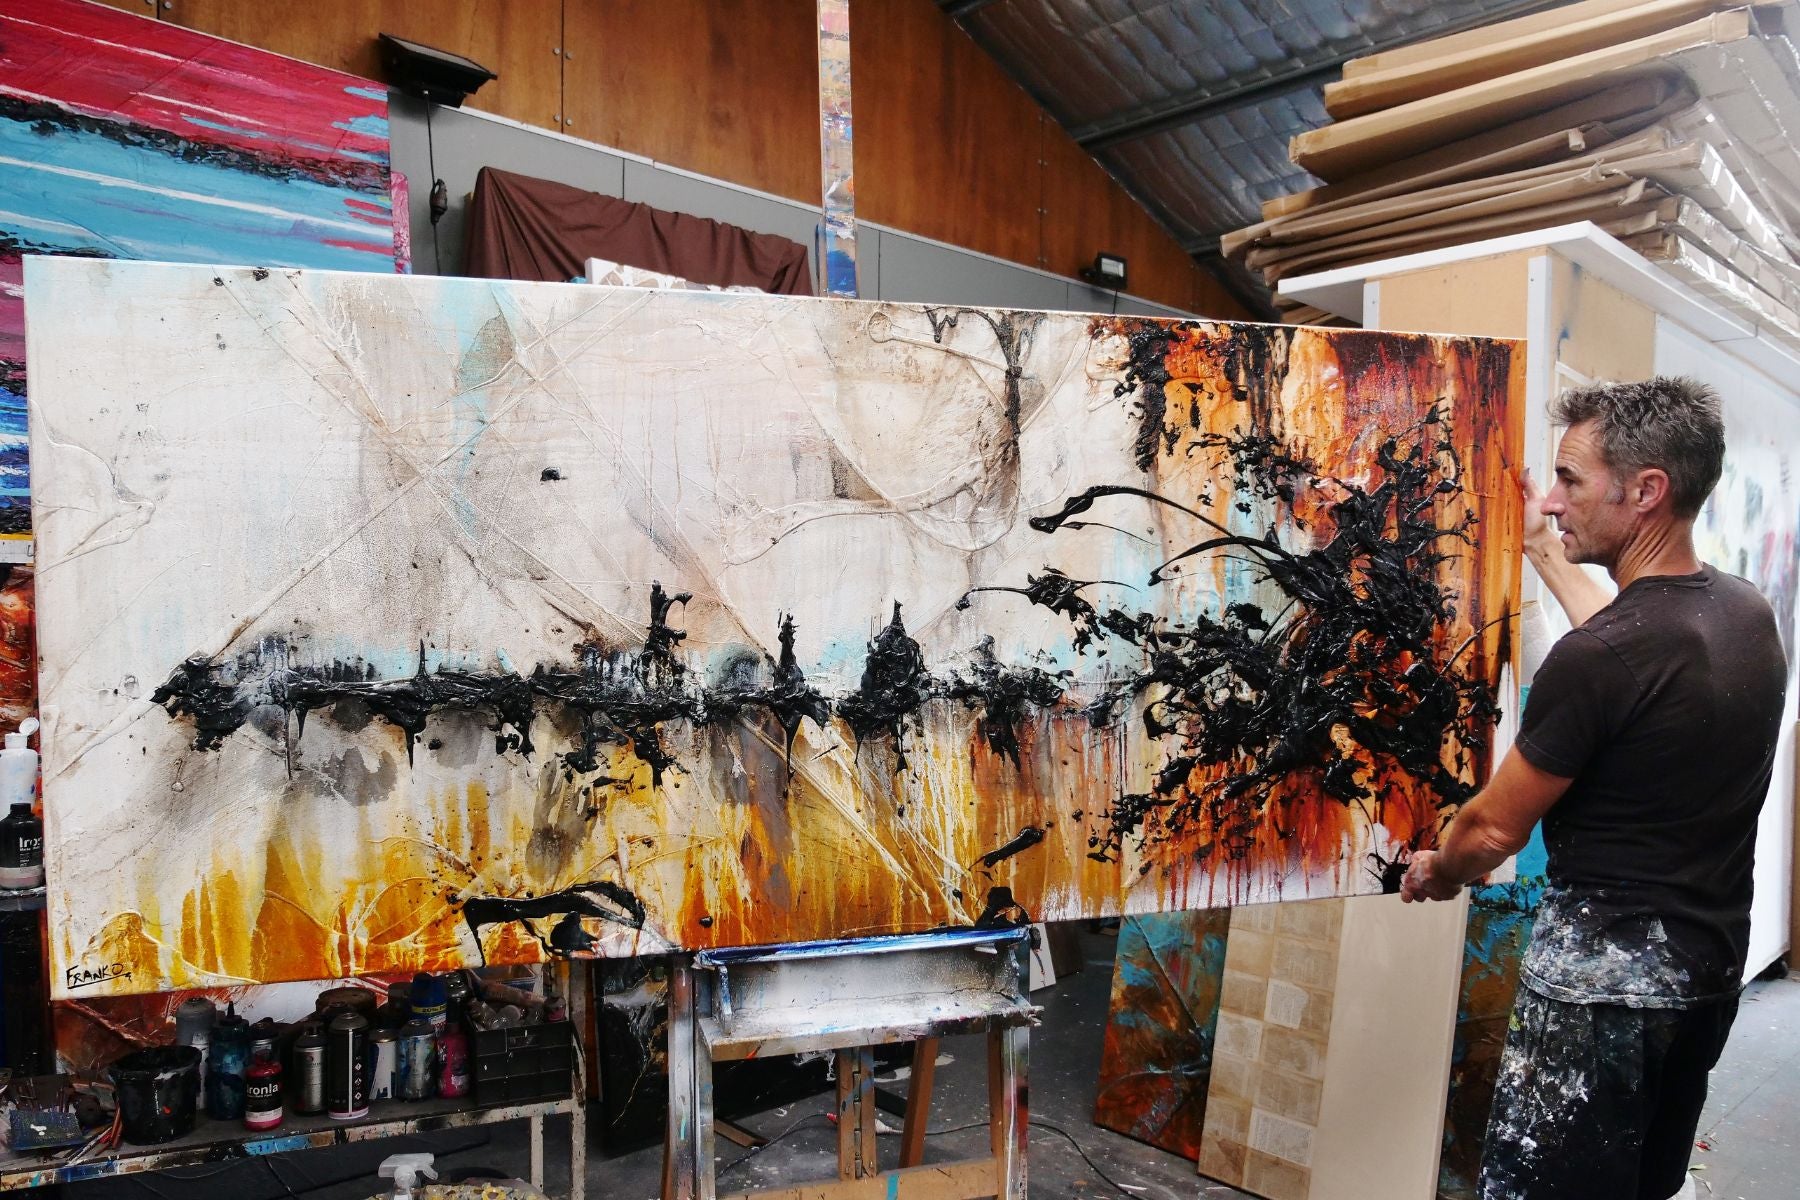 Elevated Sugar 240cm x 100cm Black Oxide Rust Textured Abstract Painting (SOLD)